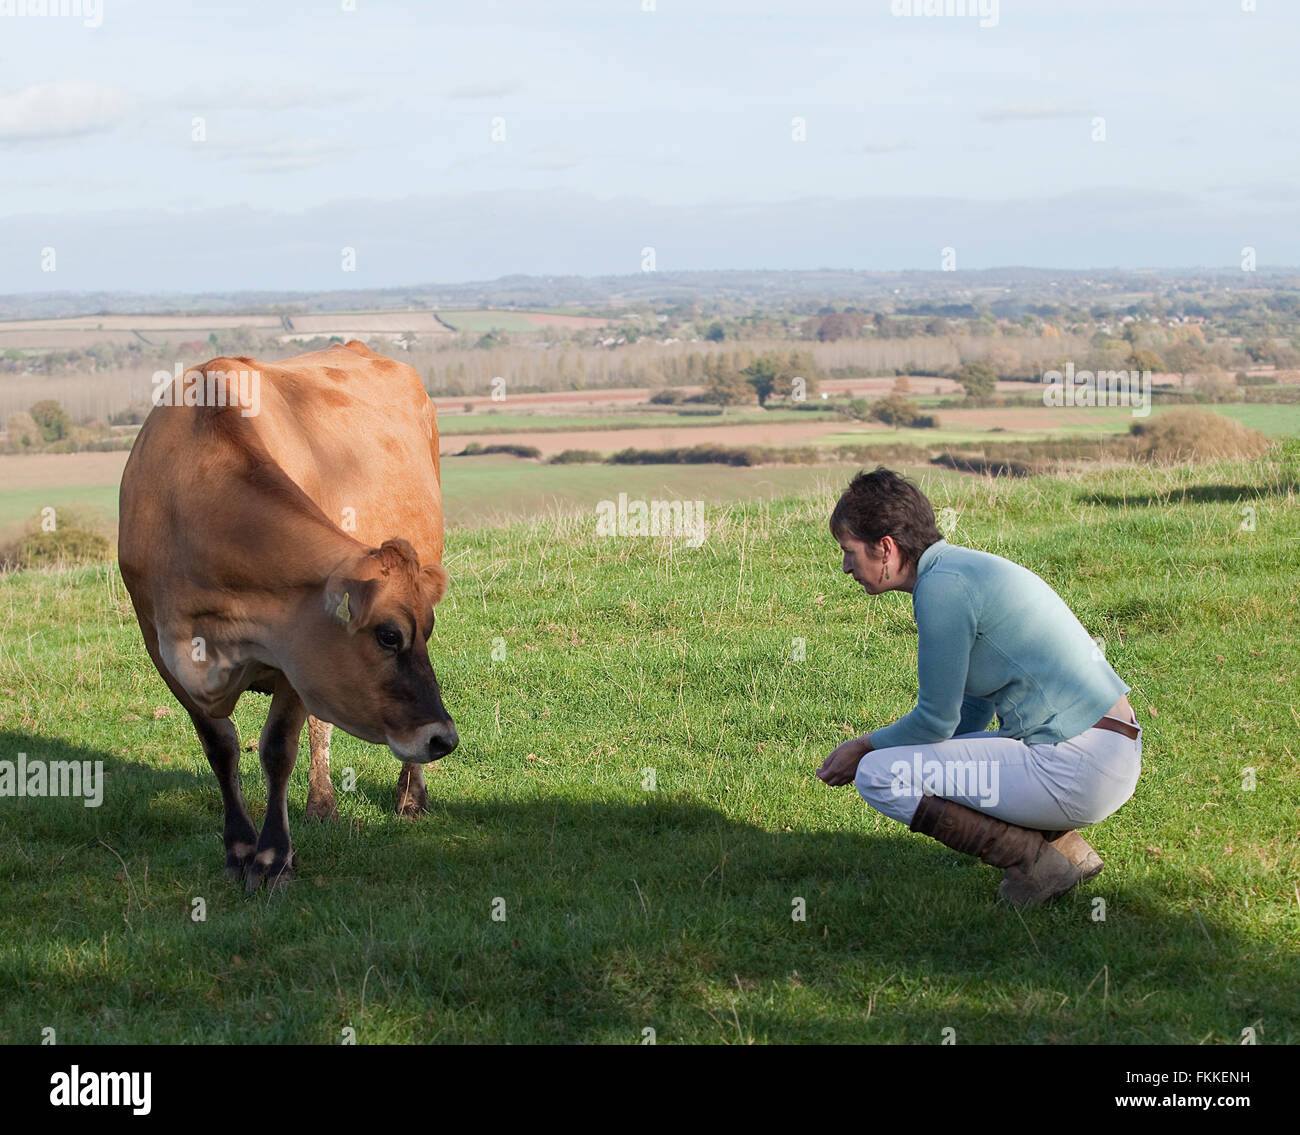 Cow looks at girl in field Stock Photo